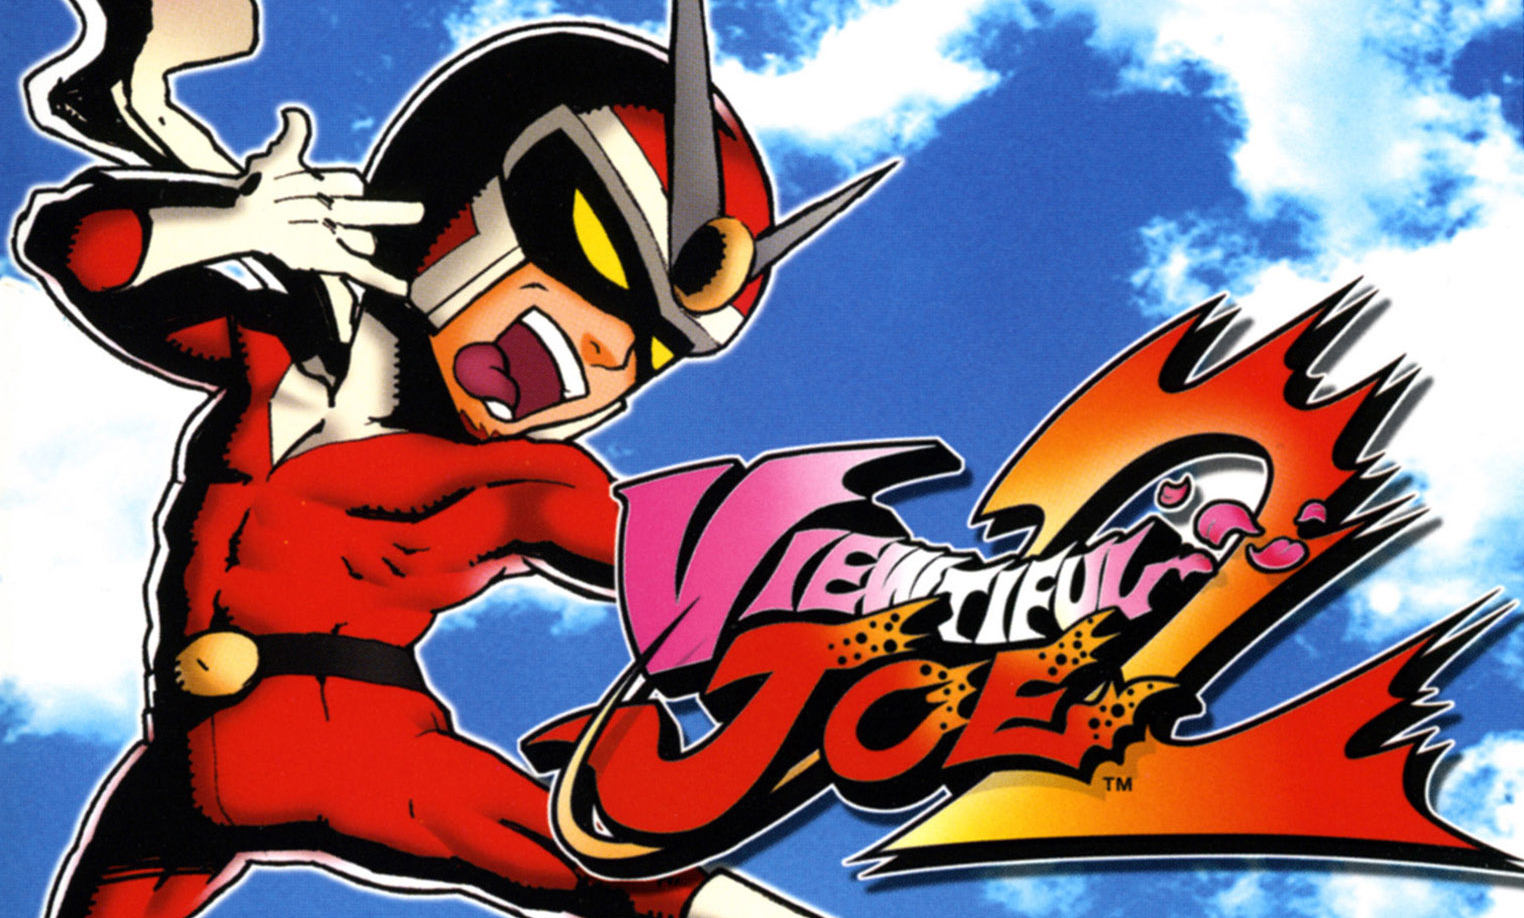 The sequel to Viewtiful Joe, Viewtiful Joe 2 sees Joe teaming up with his g...